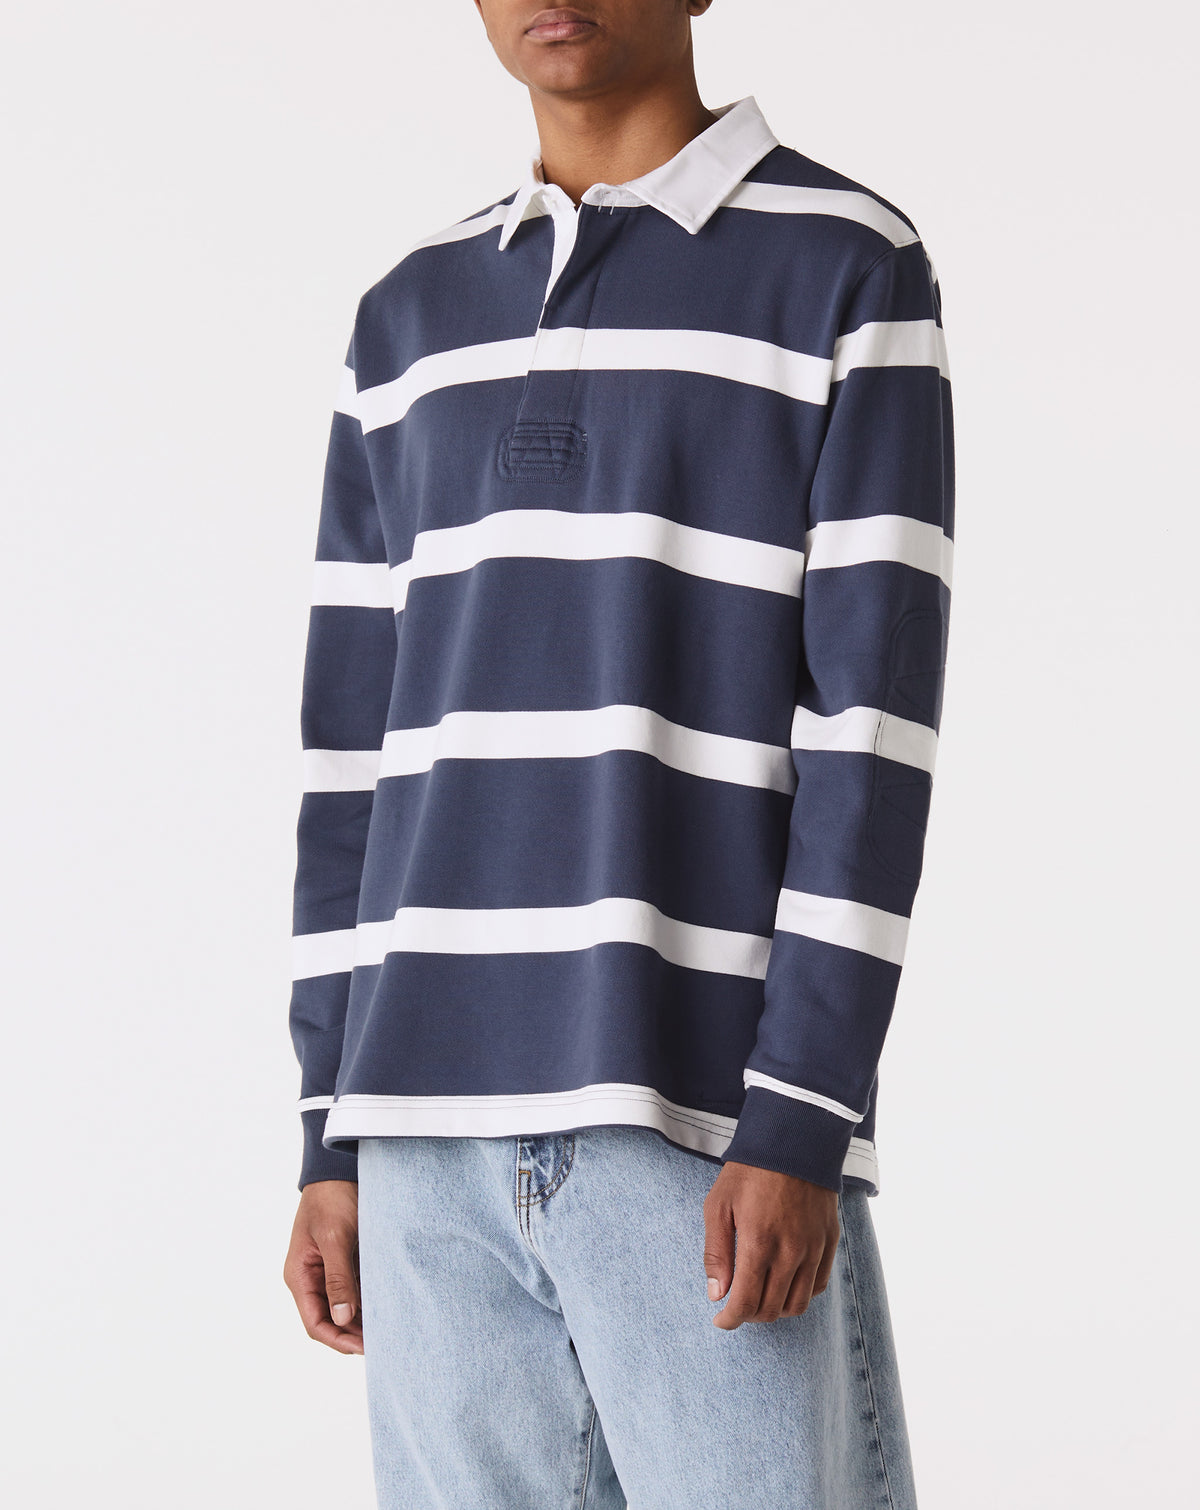 Nike Striped Heavyweight Rugby Shirt - Rule of Next Apparel